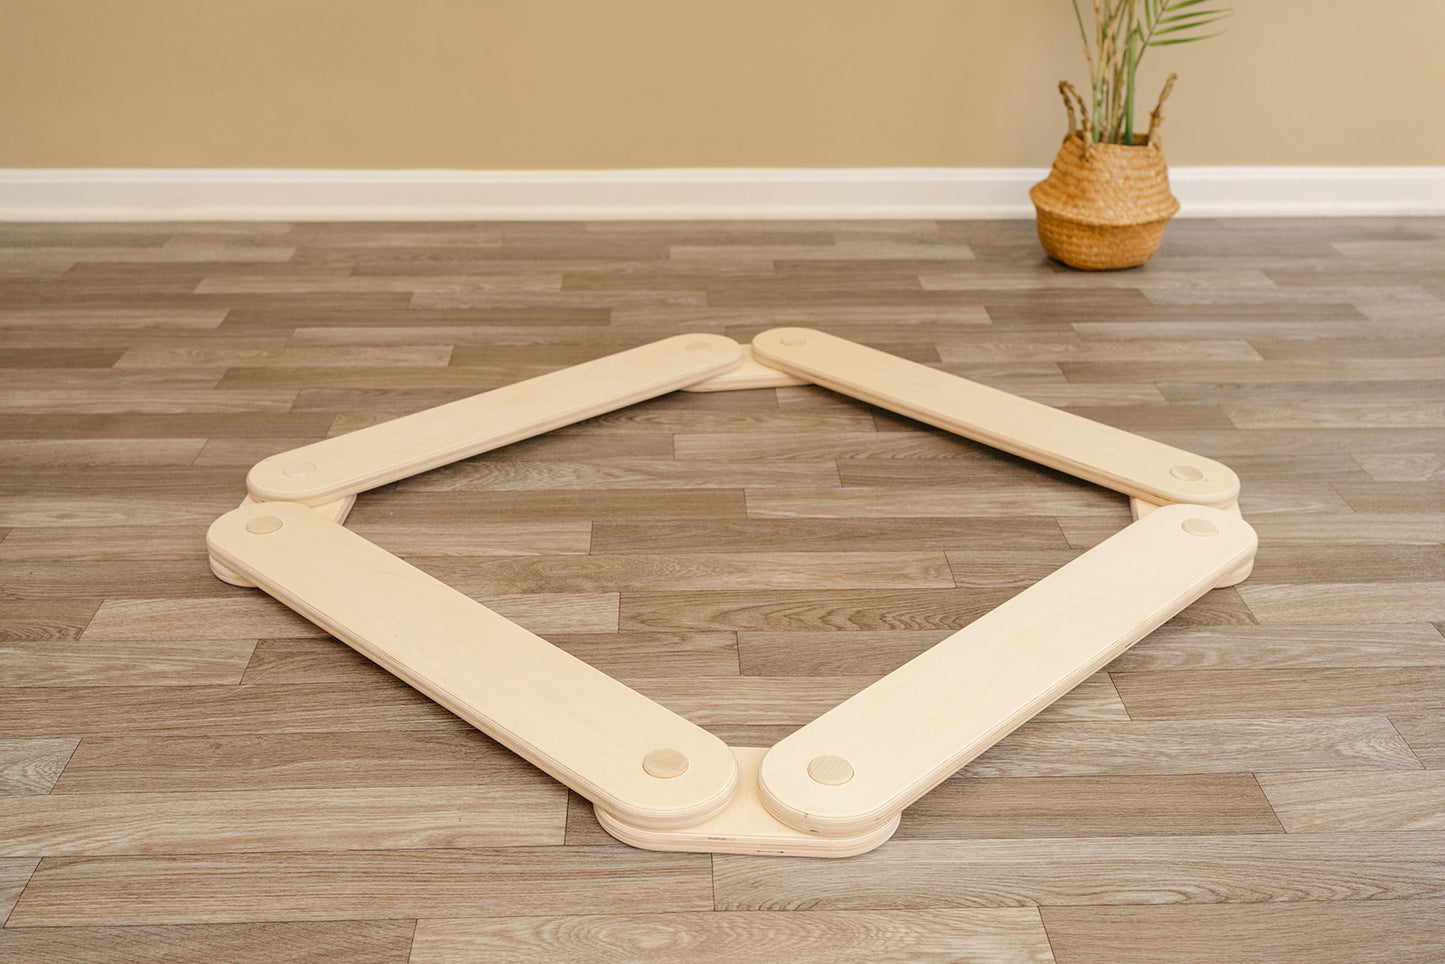 Low balance beam for small children to learn to walk and balance on